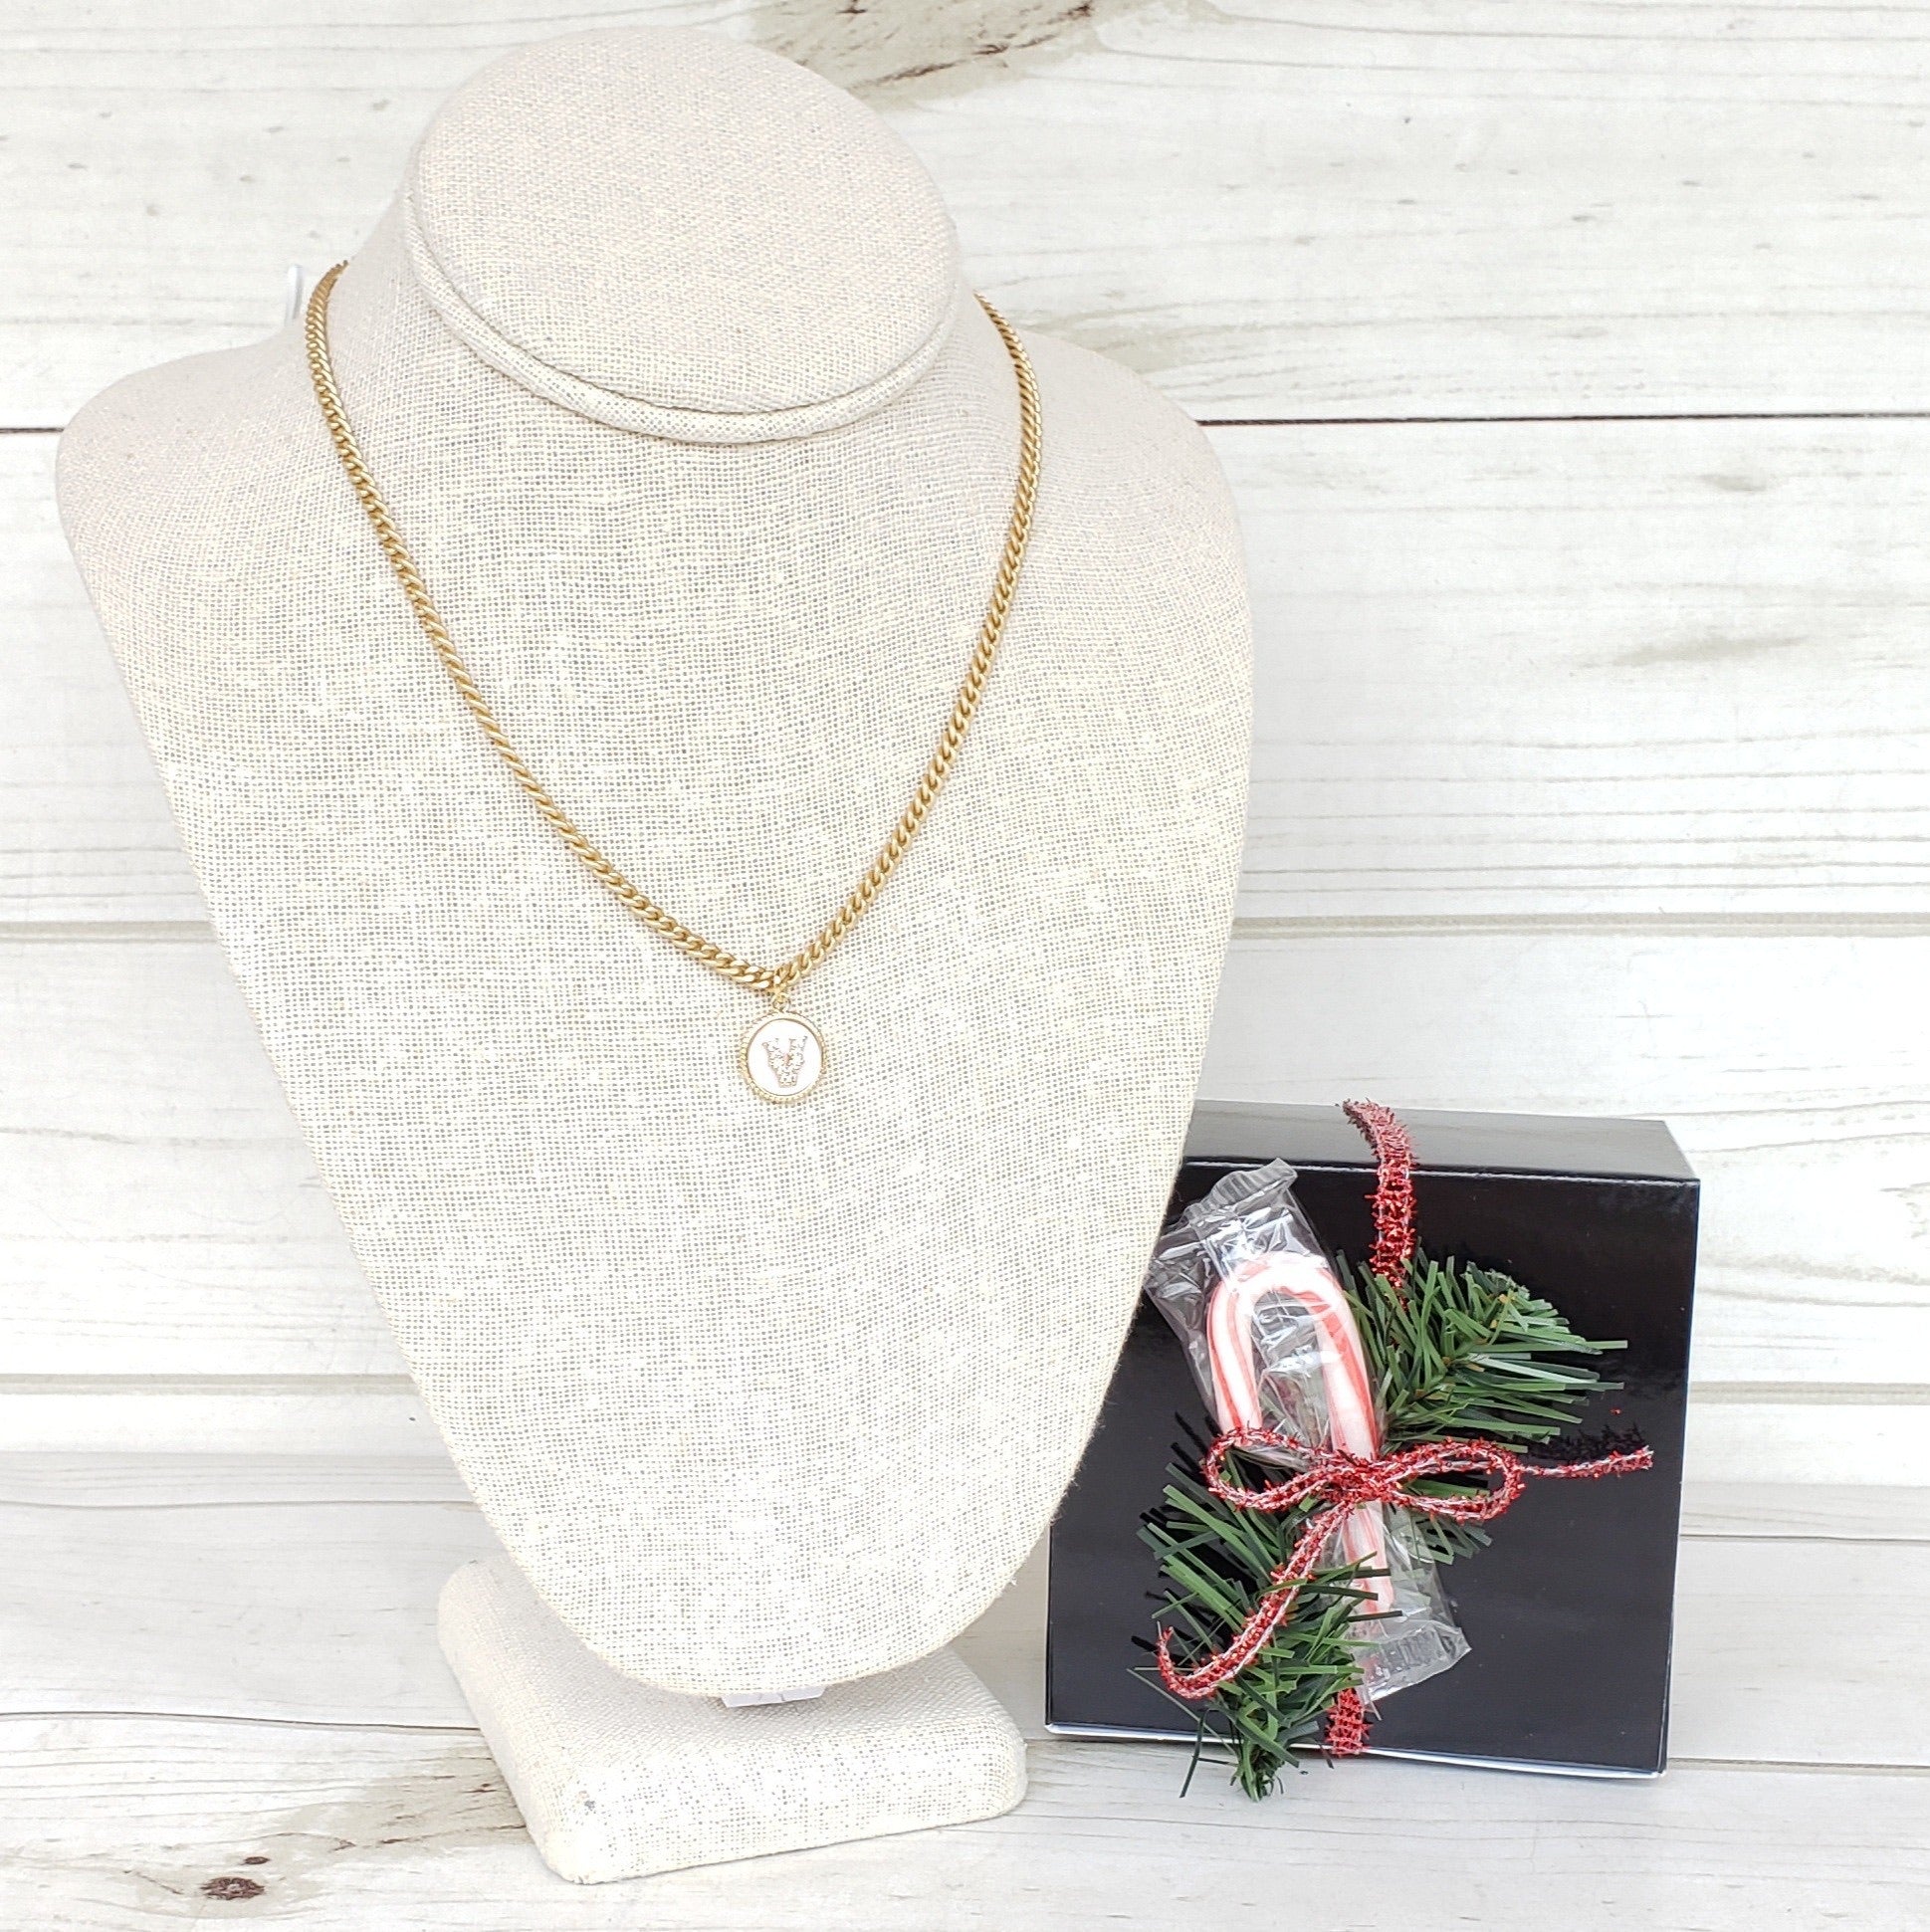 16” Monogram Necklace on Small Curb